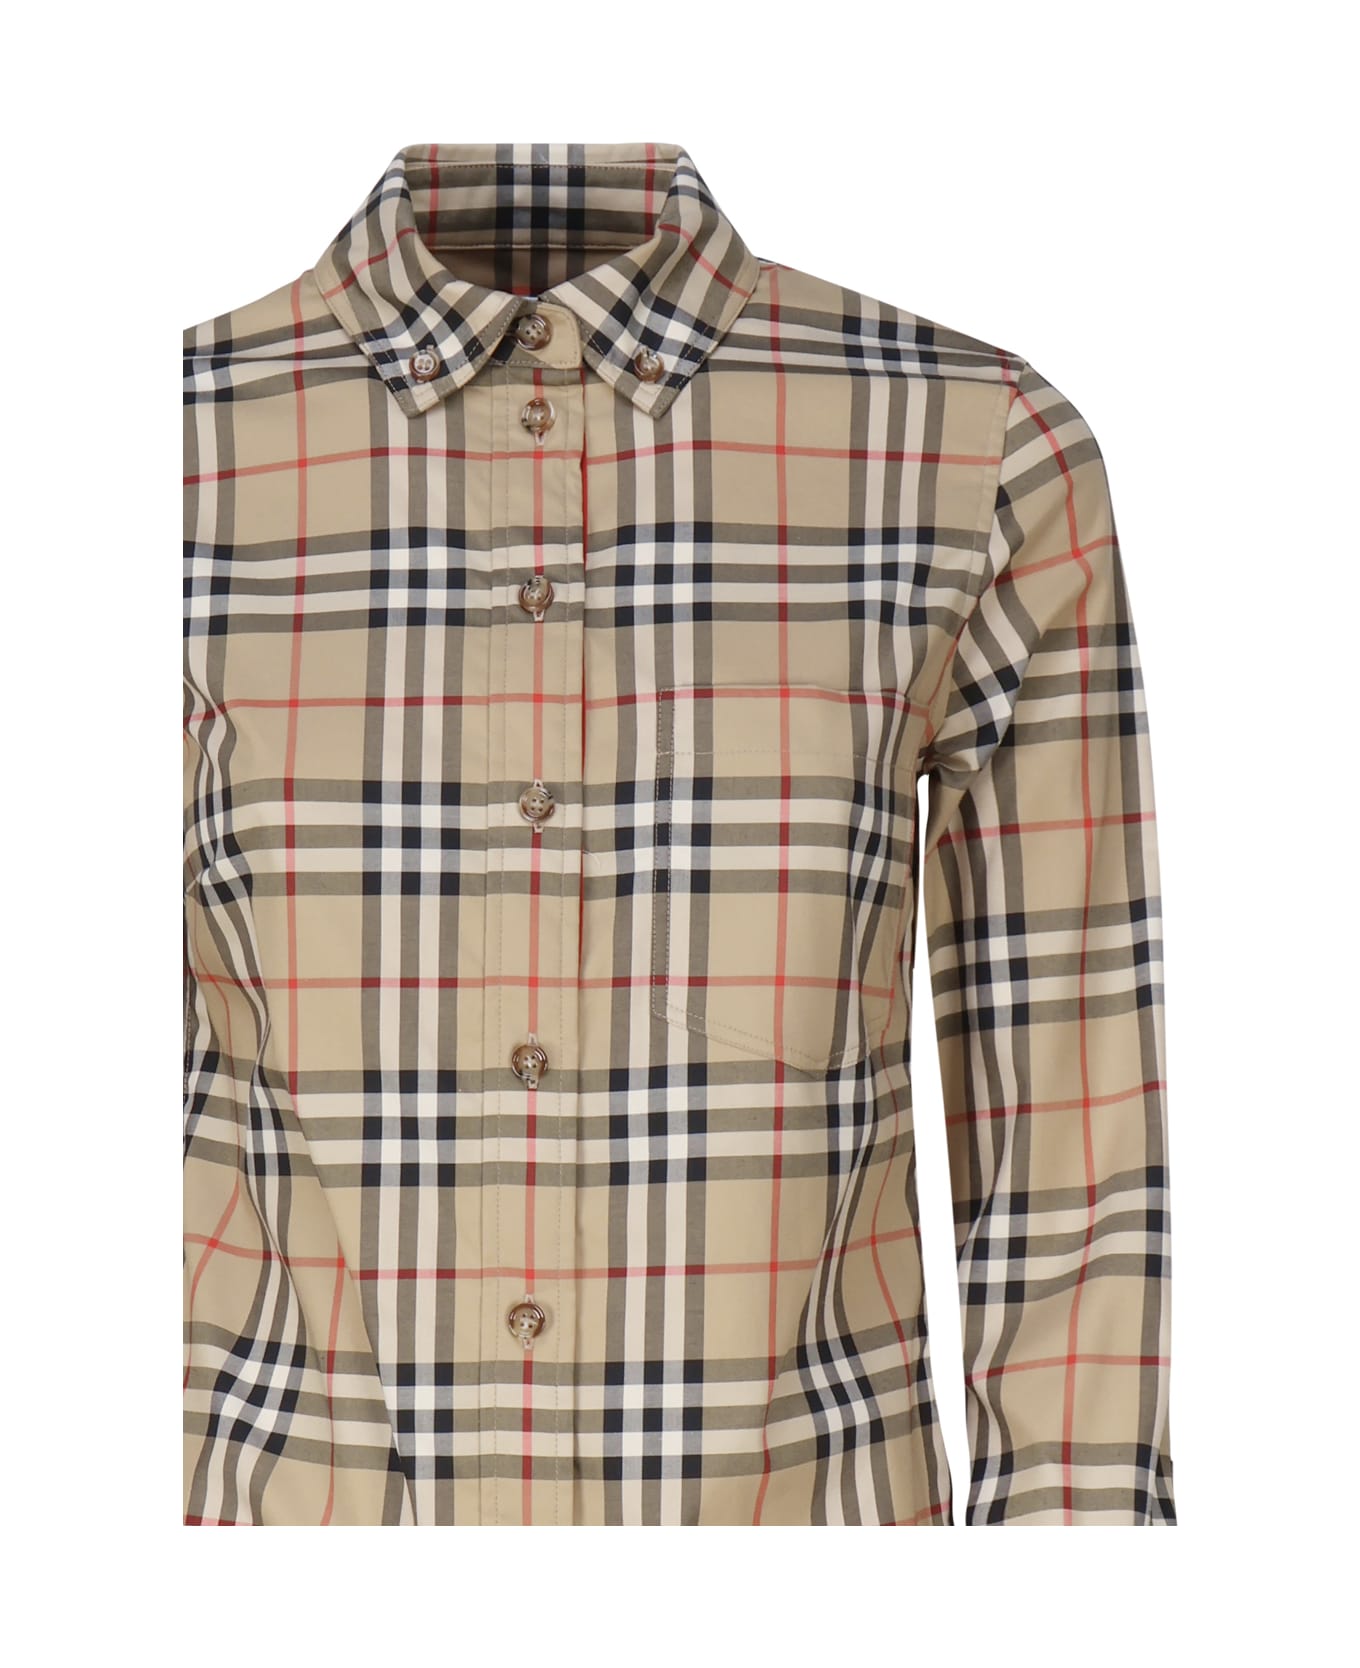 Burberry Shirt With Vintage Check Pattern - Beige